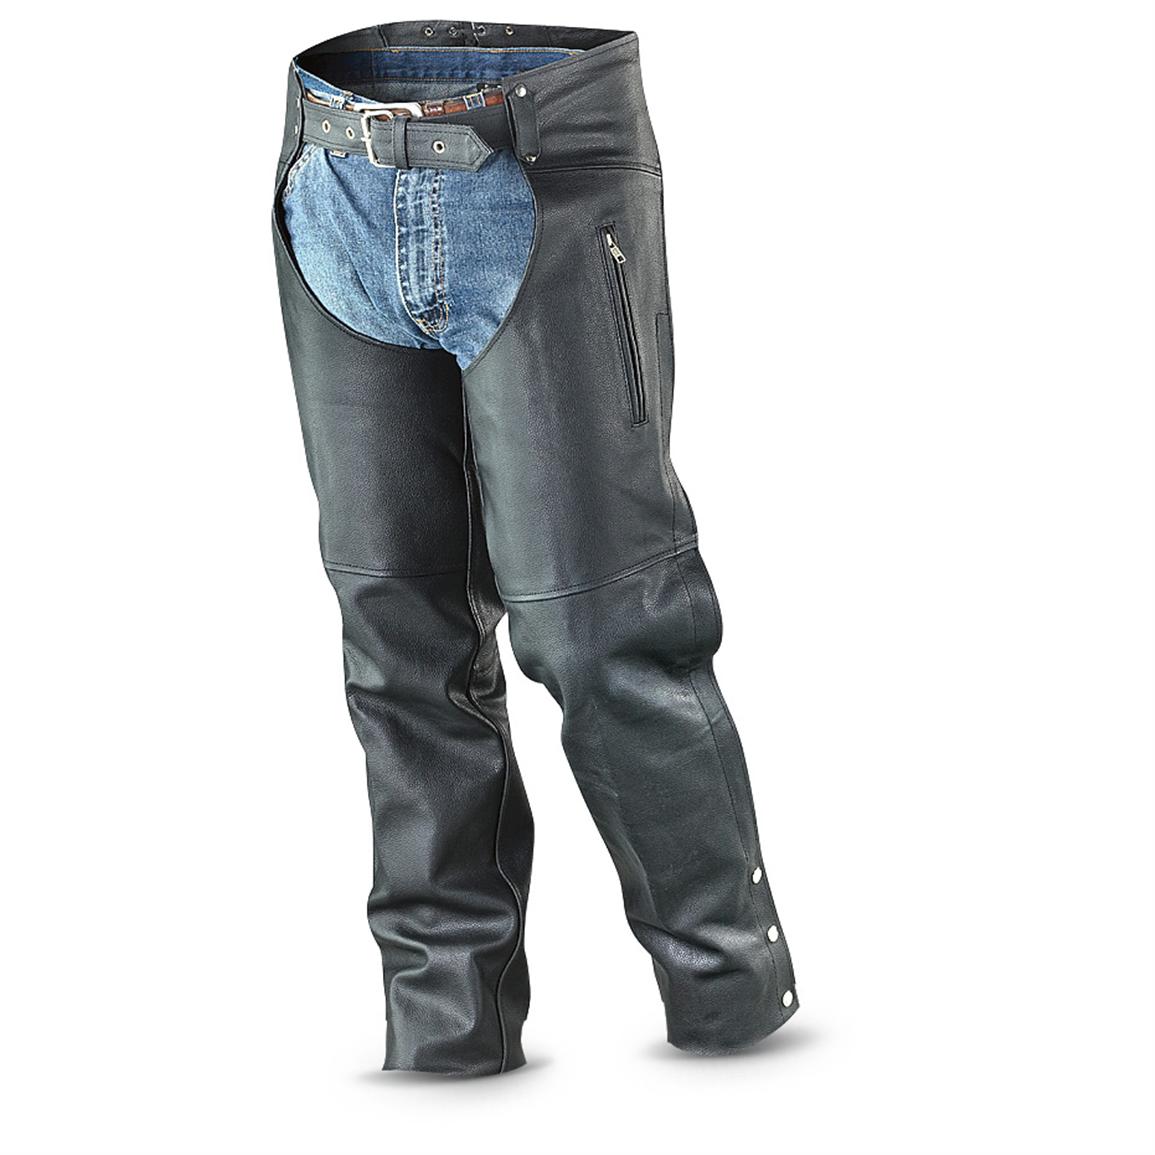 Mossi® Leather Chaps, Black - 211599, Jeans & Pants at Sportsman's Guide